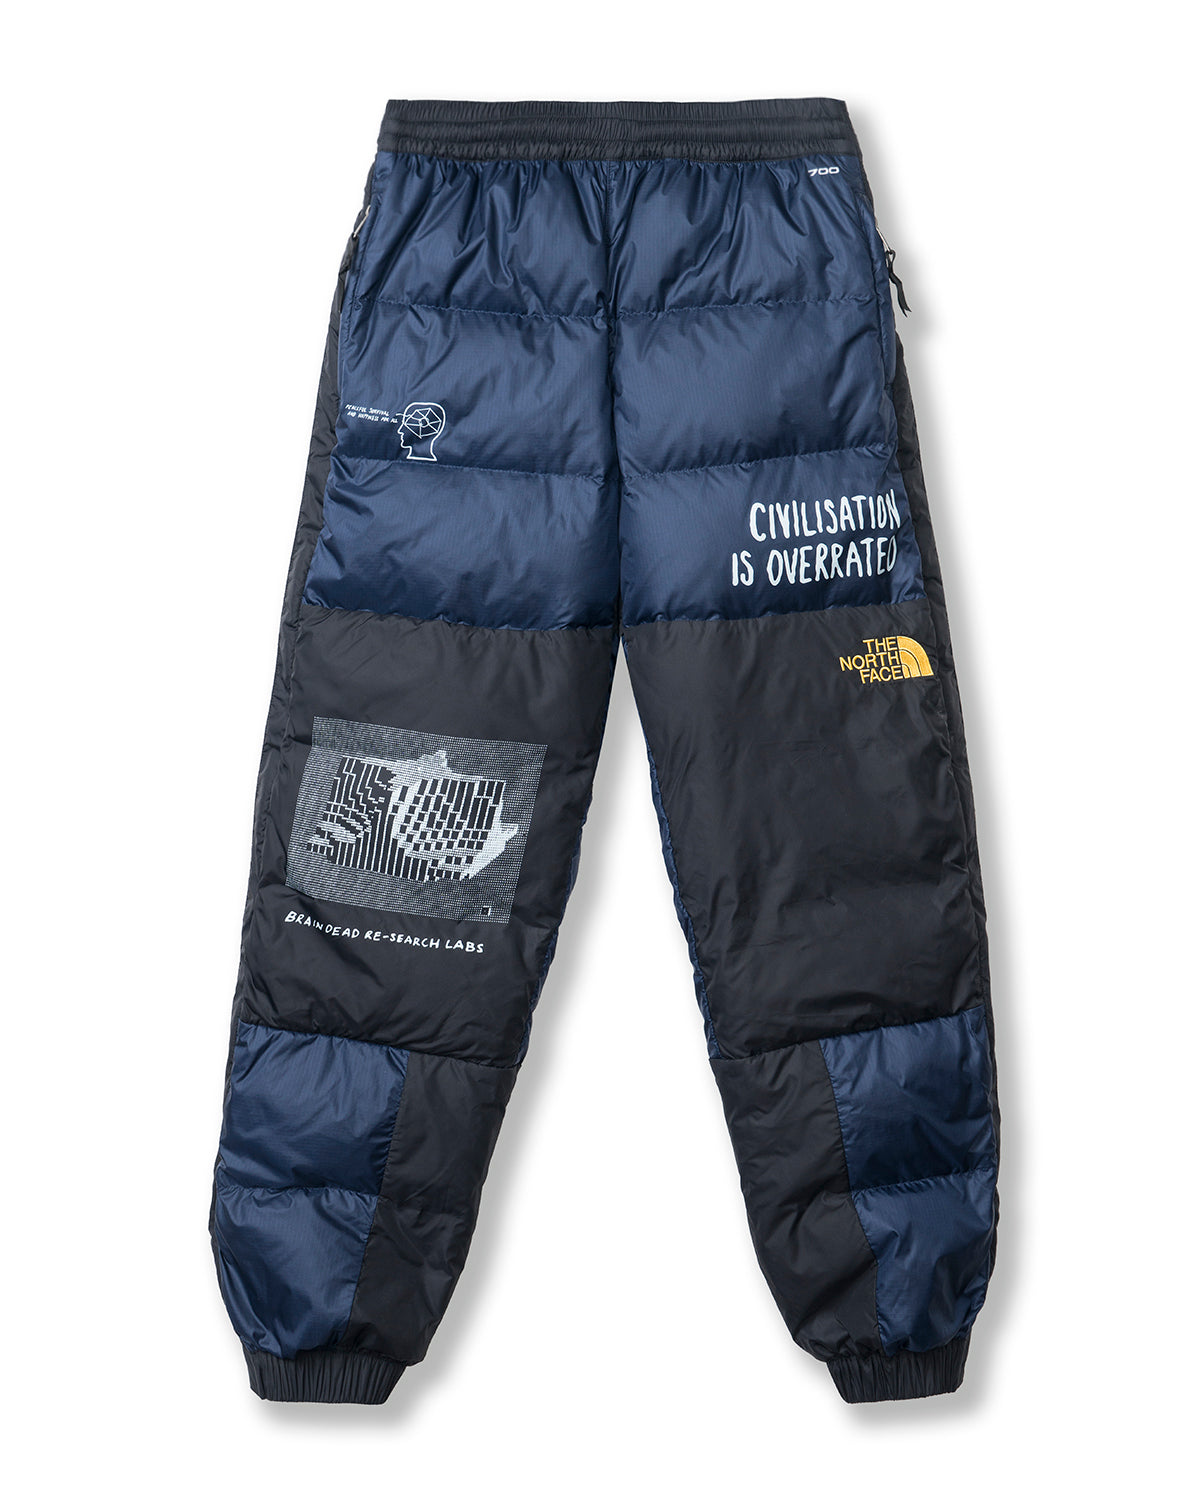 north face puffer pants Cheaper Than 